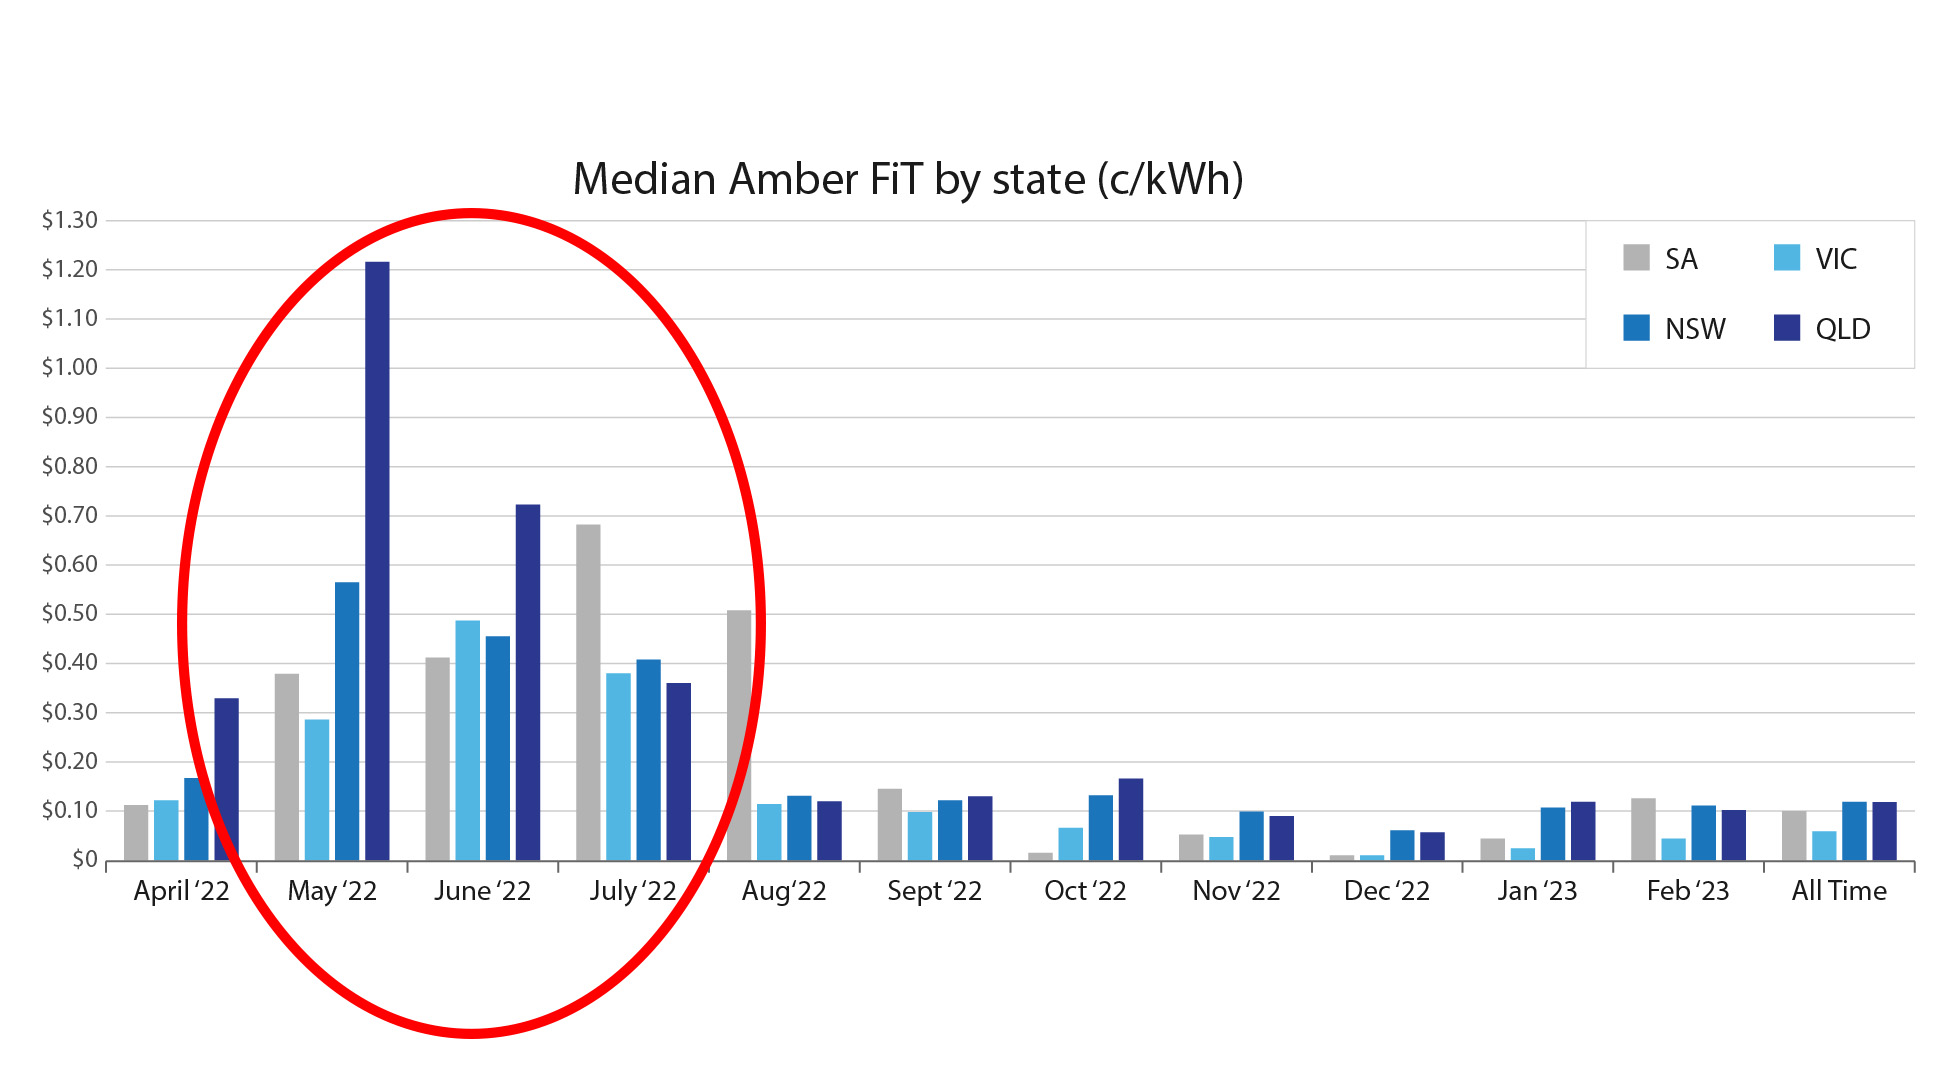 Median Amber feed-in tariff by state